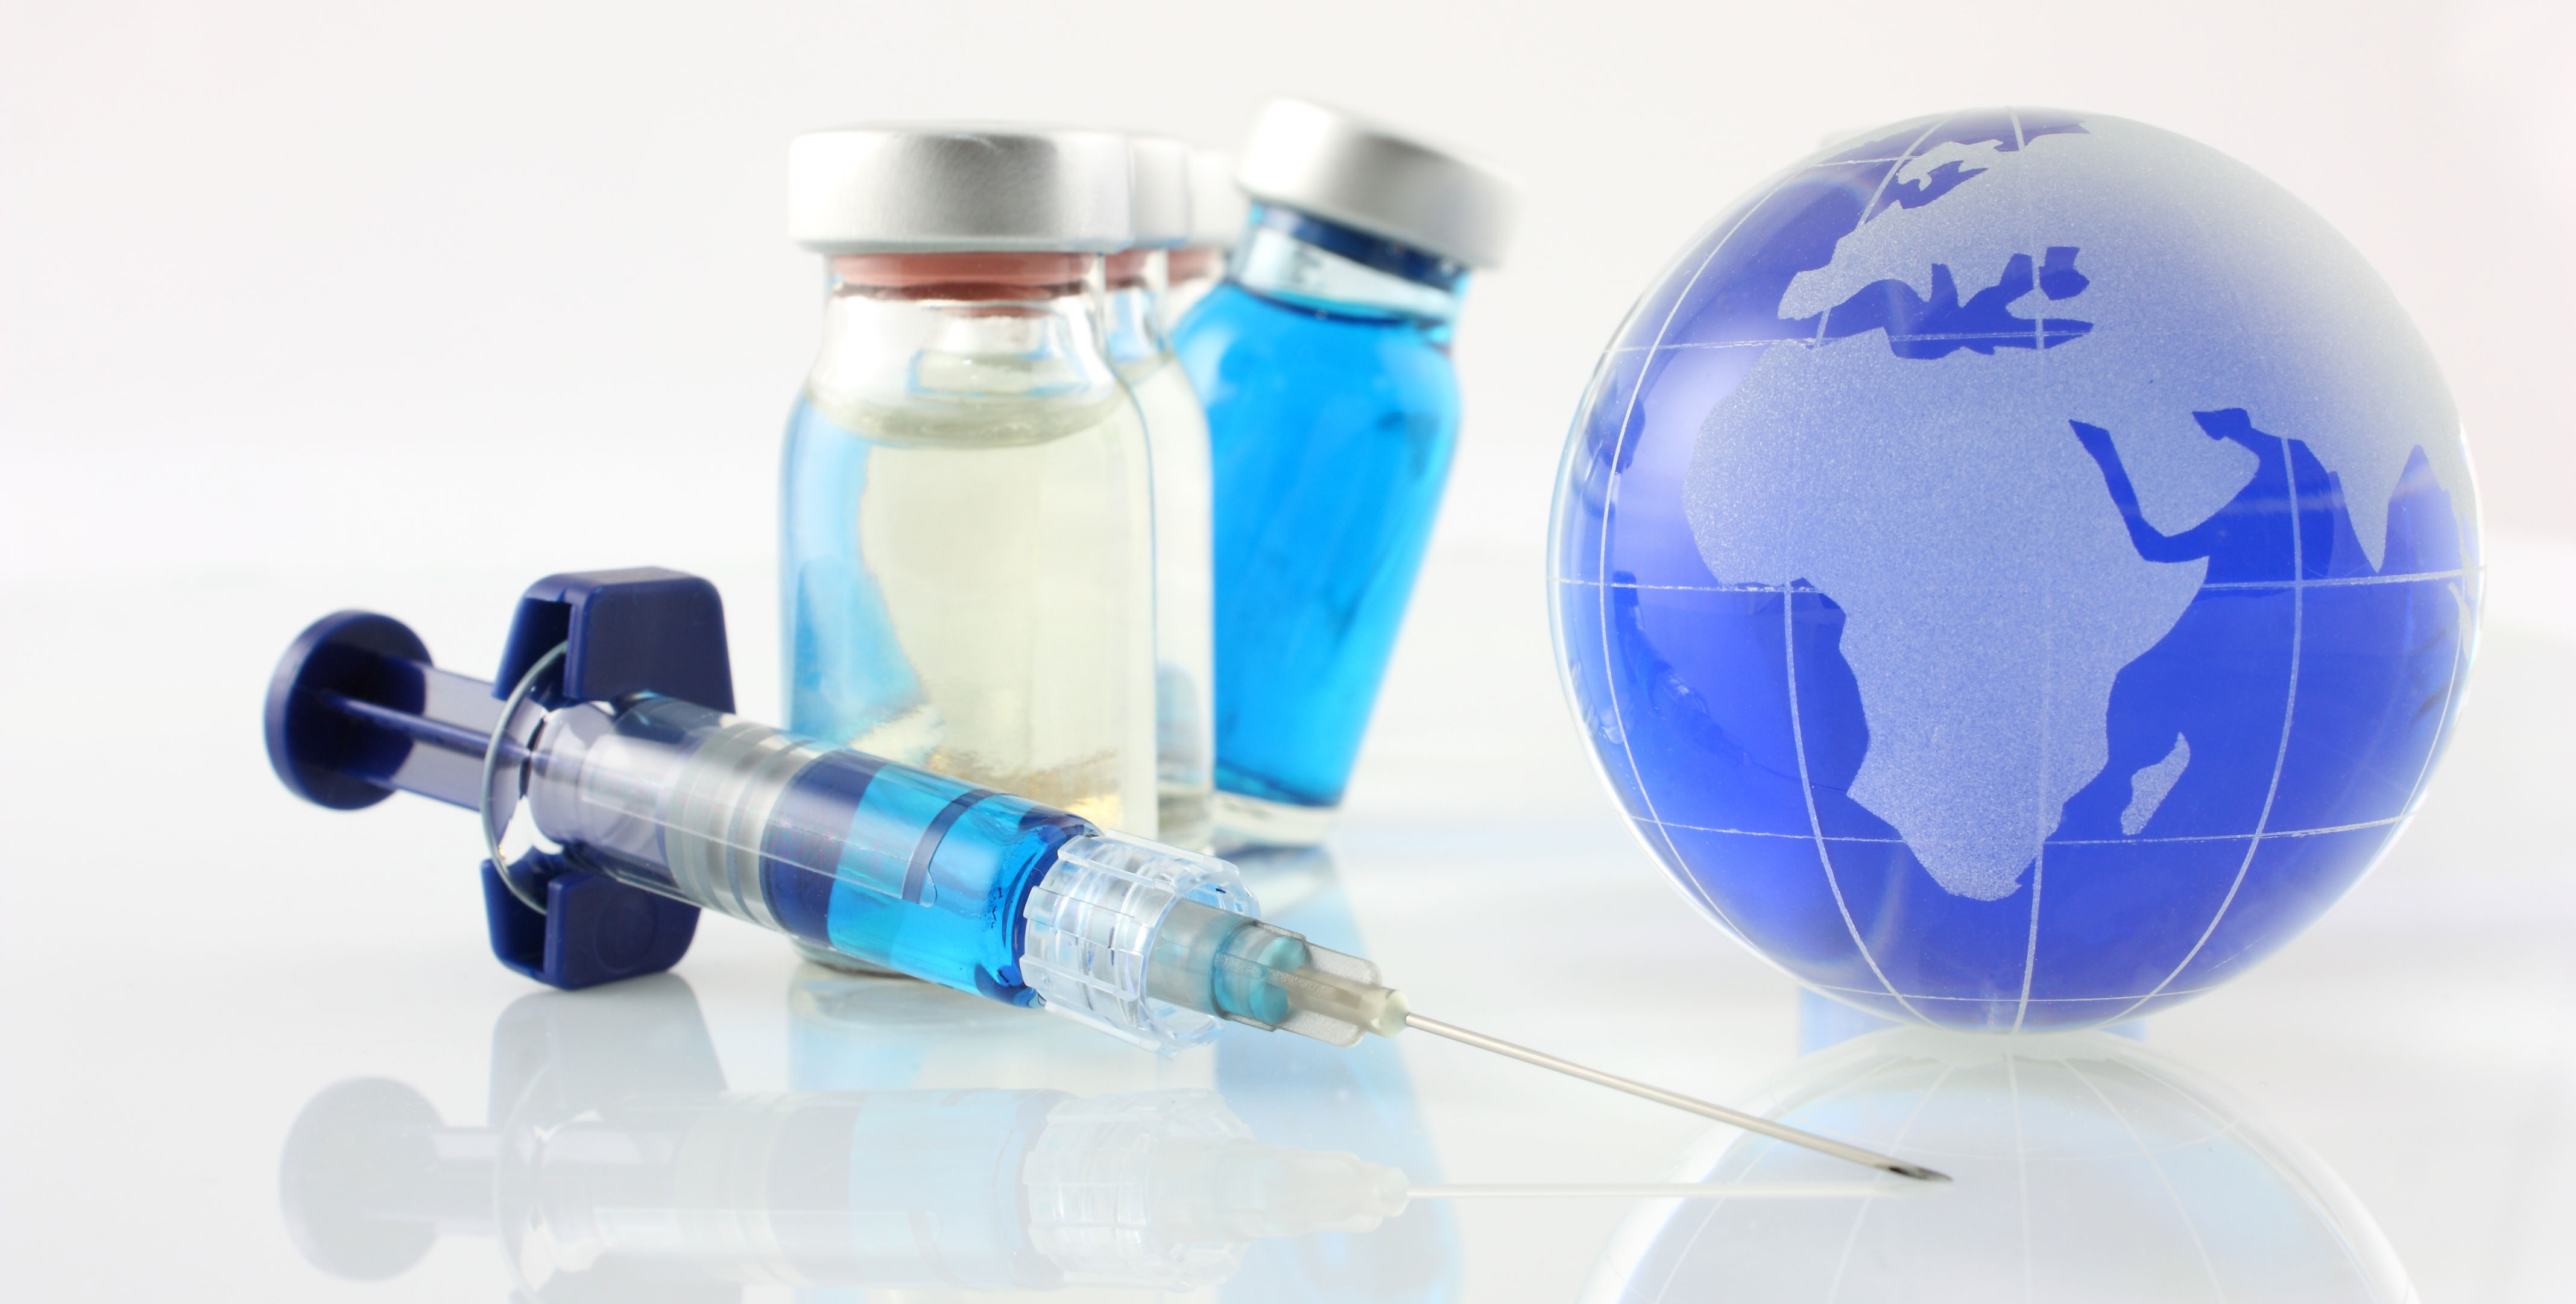 Image with syringe, vaccine bottles and a small Earth globe